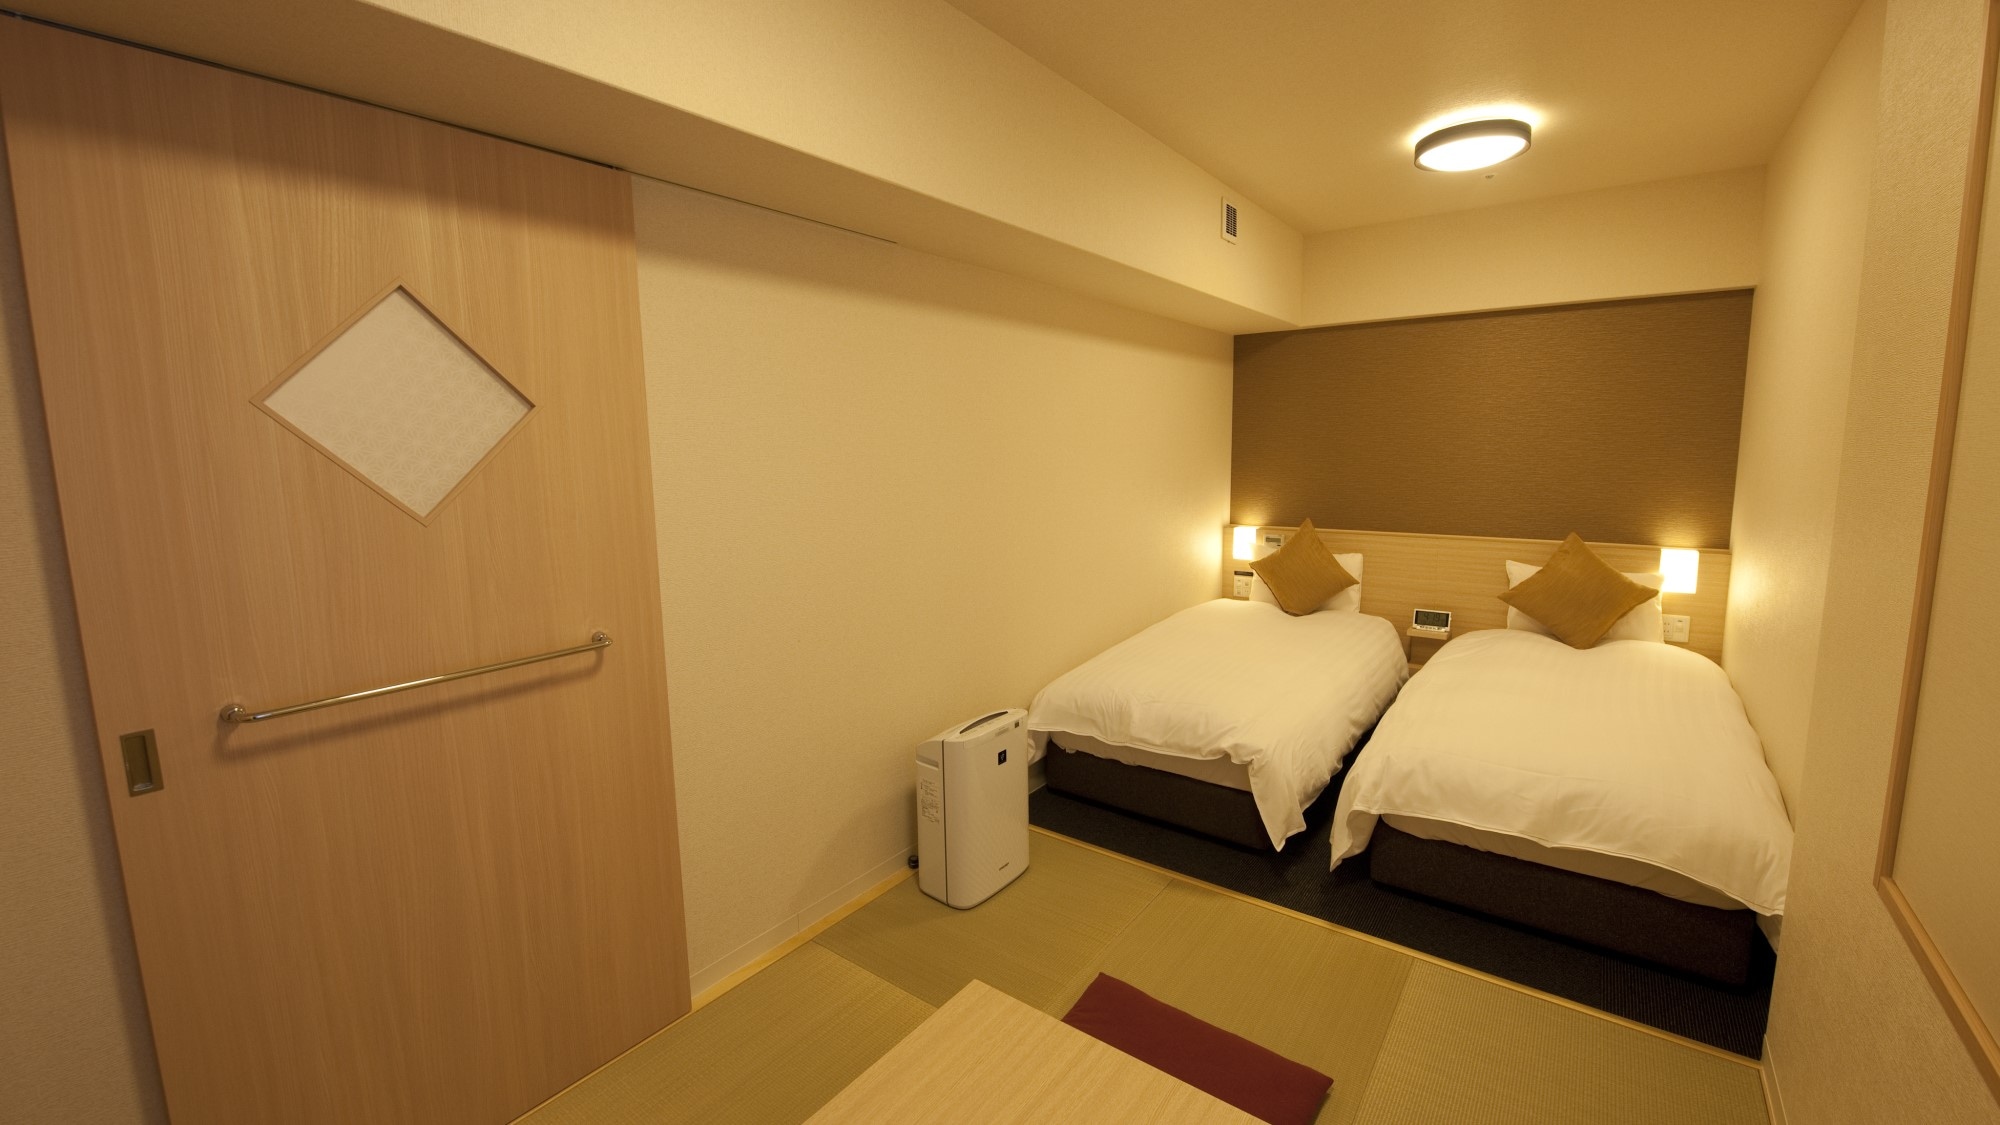 ◆ Japanese and Western room 27.0 square meters with 32 inch TV